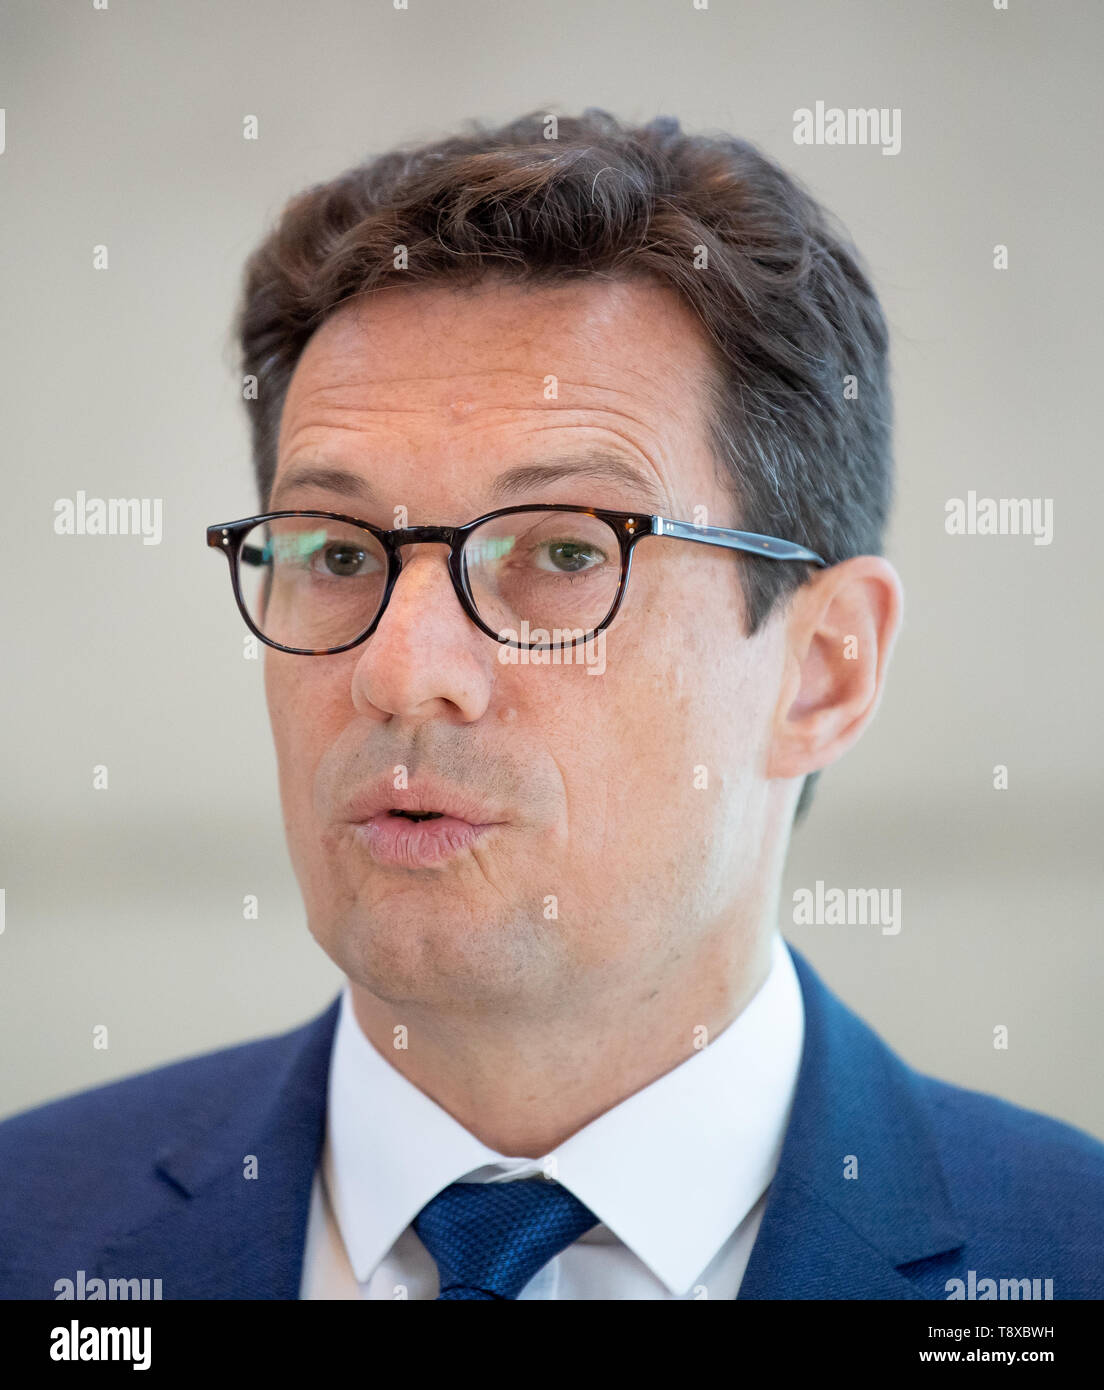 Stuttgart, Germany. 13th May, 2019. Michael Frick, member of the management board of Mahle GmbH, speaks at the annual press conference of the automotive supplier Mahle. Falling market shares for diesel and the global uncertainty caused by smouldering trade conflicts are causing Mahle problems. Credit: Fabian Sommer/dpa/Alamy Live News Stock Photo